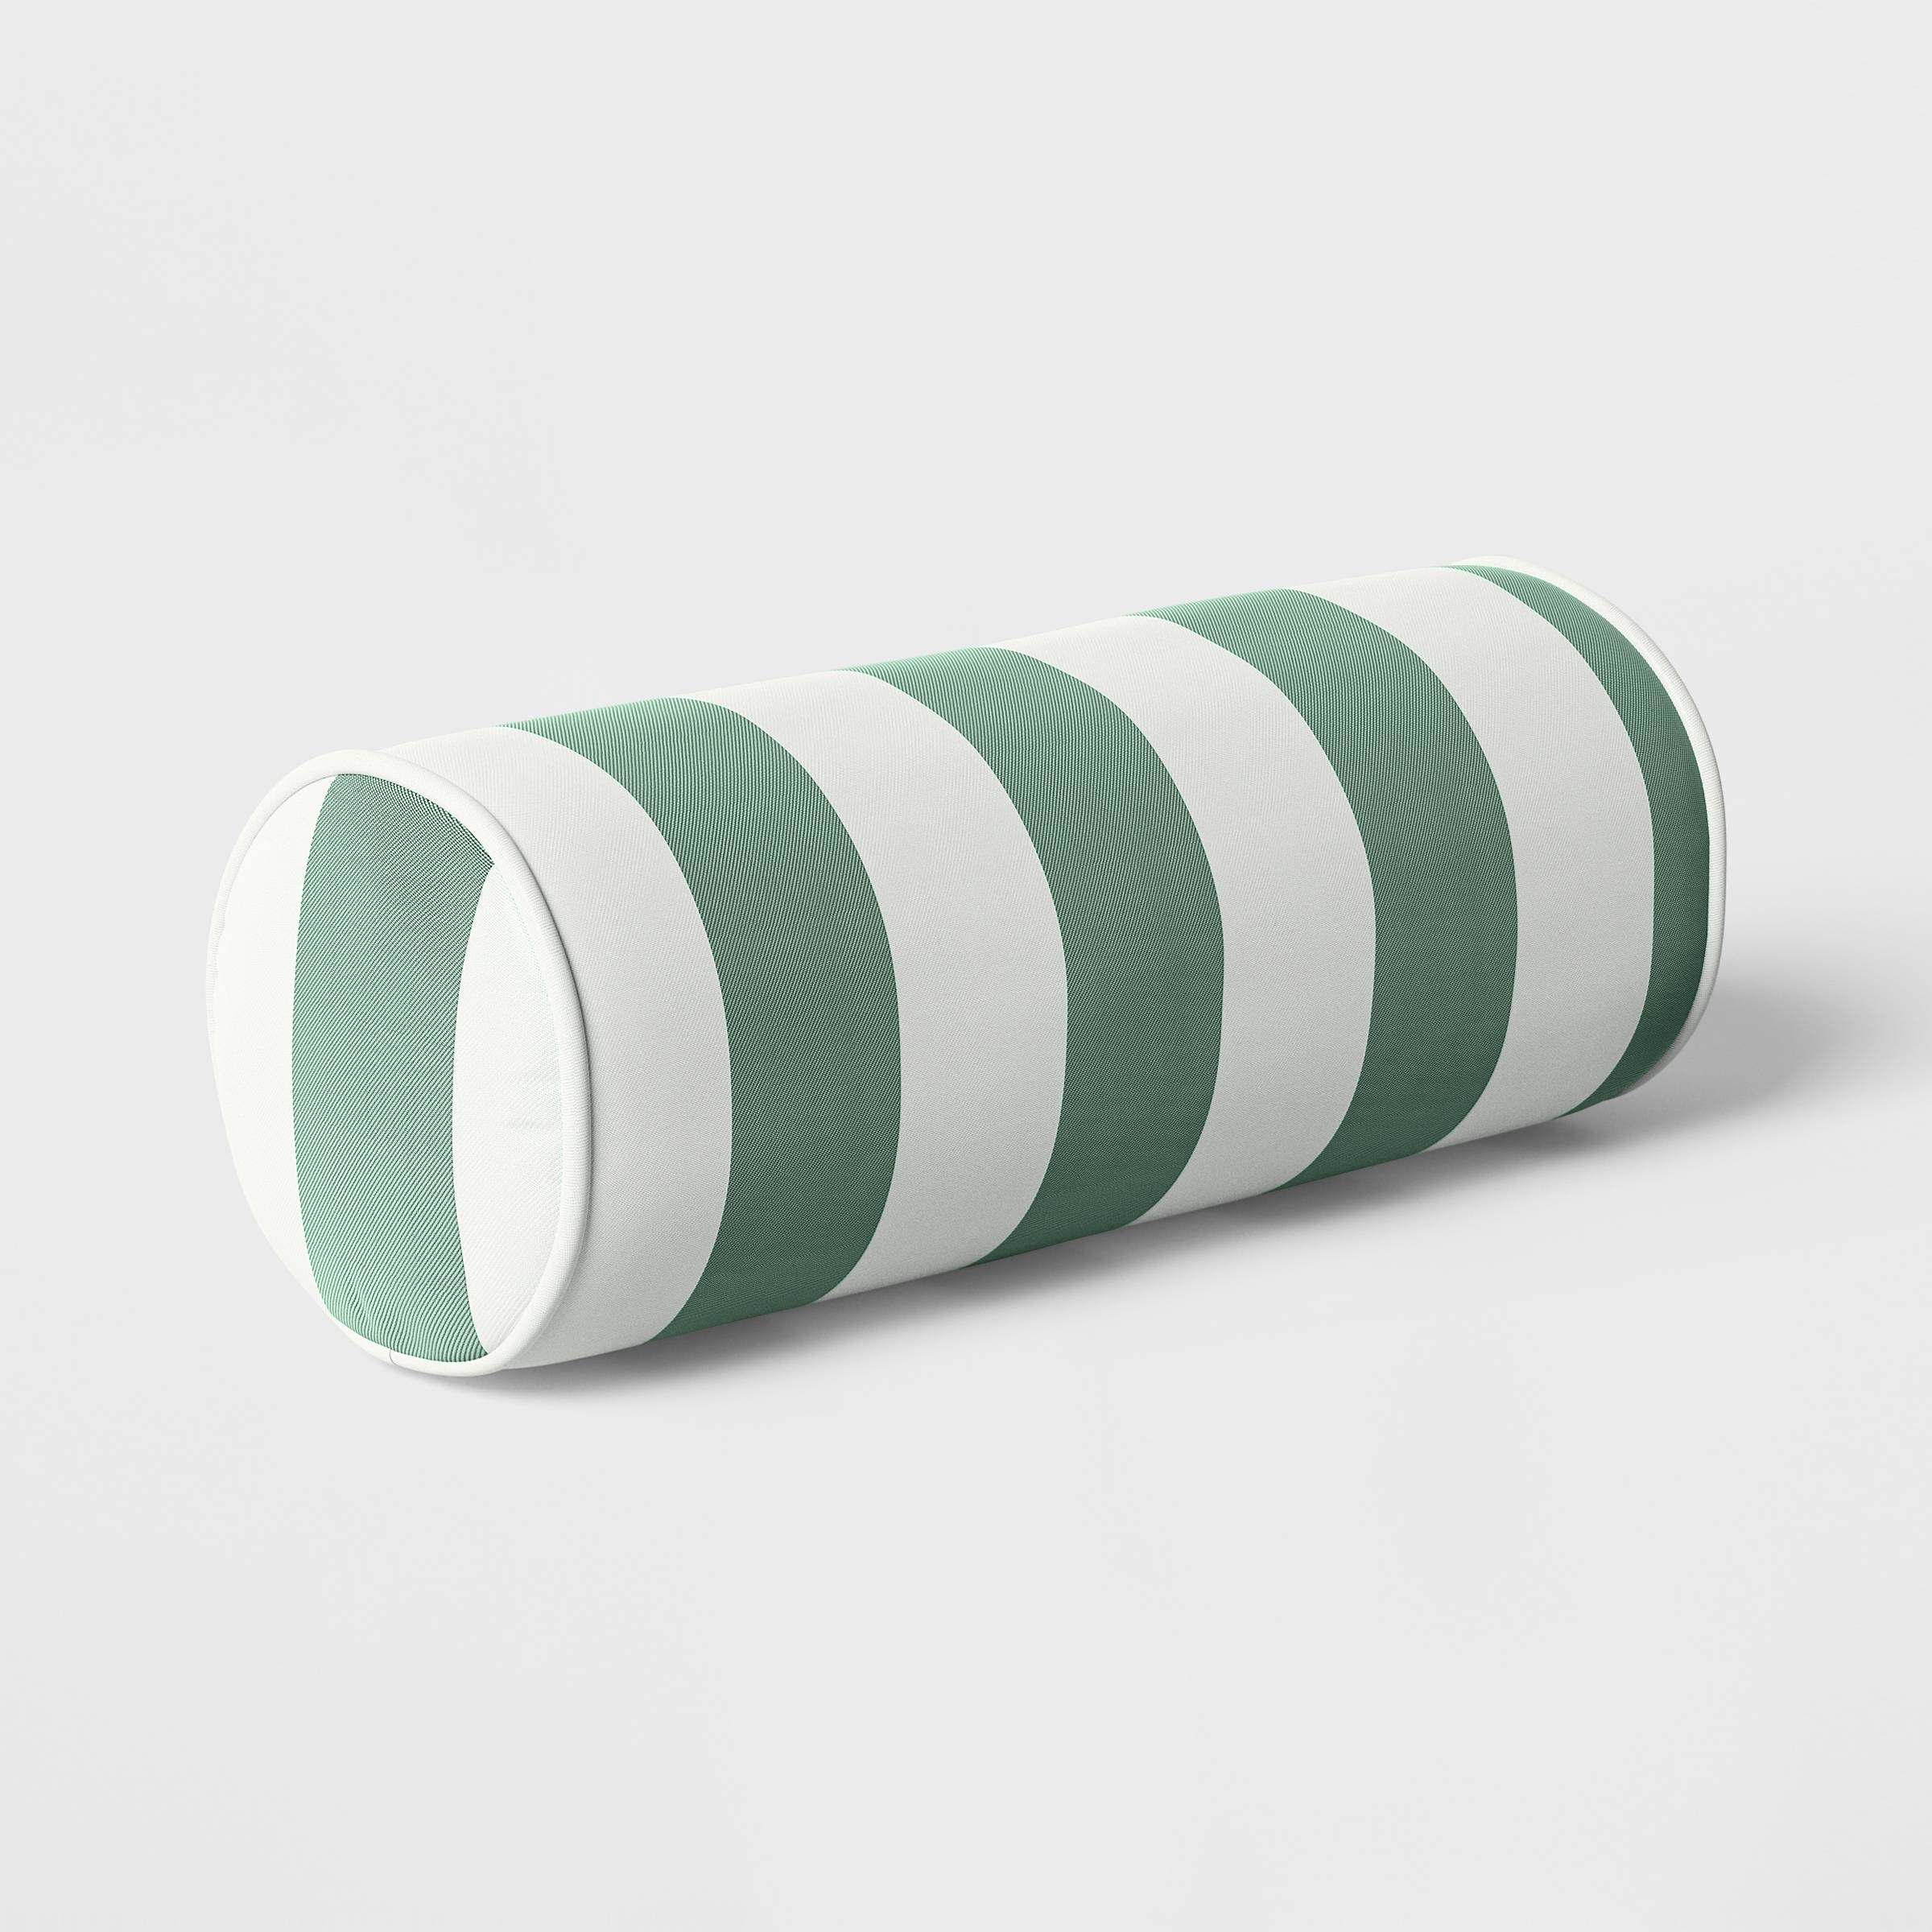 A striped cylindrical bolster pillow on a plain background